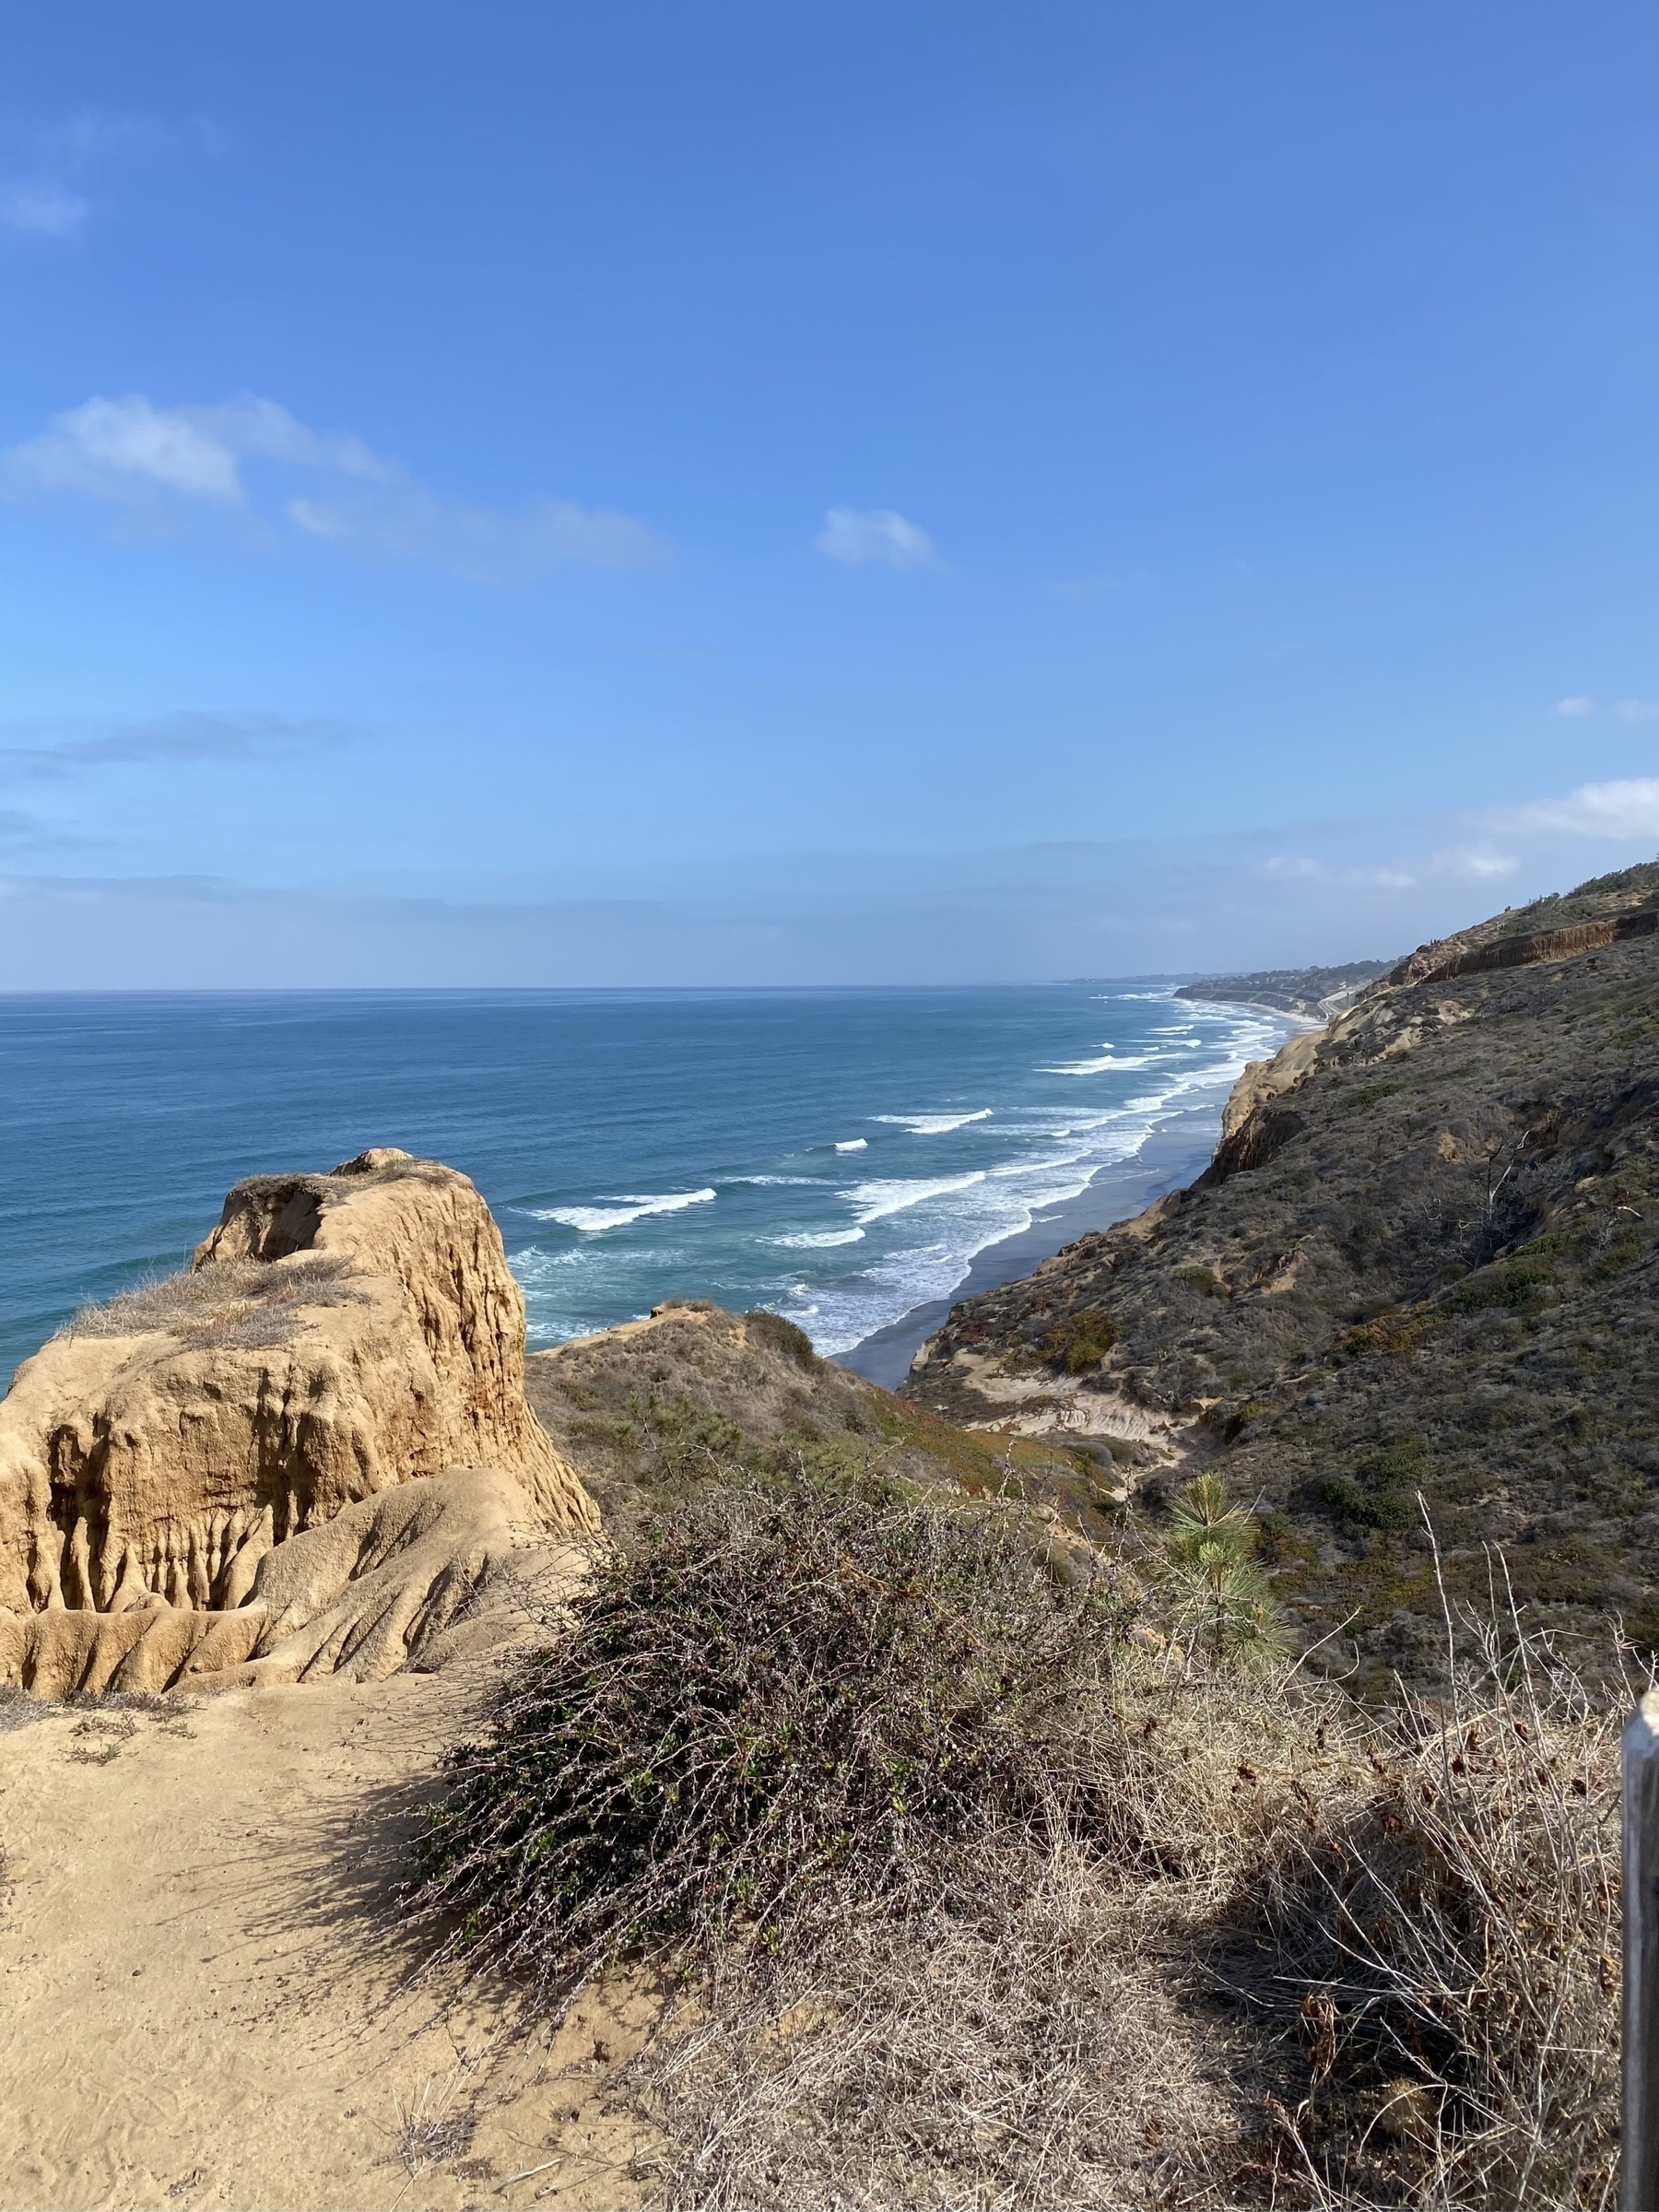 View of the Pacific Ocean from a clifftop overlook.